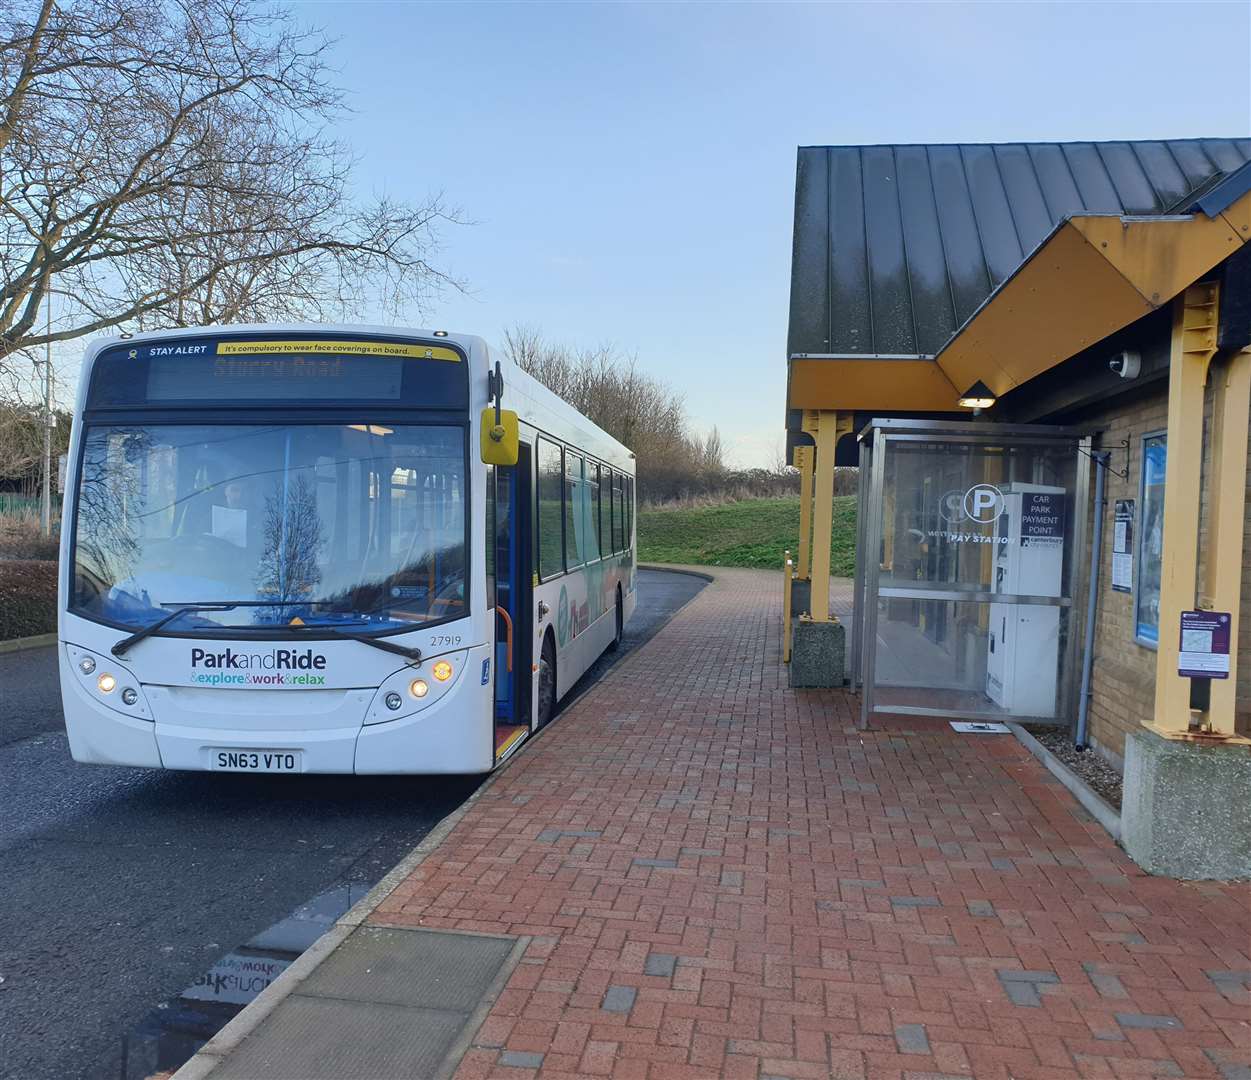 Canterbury City Council wants to reopen Sturry Road Park and Ride